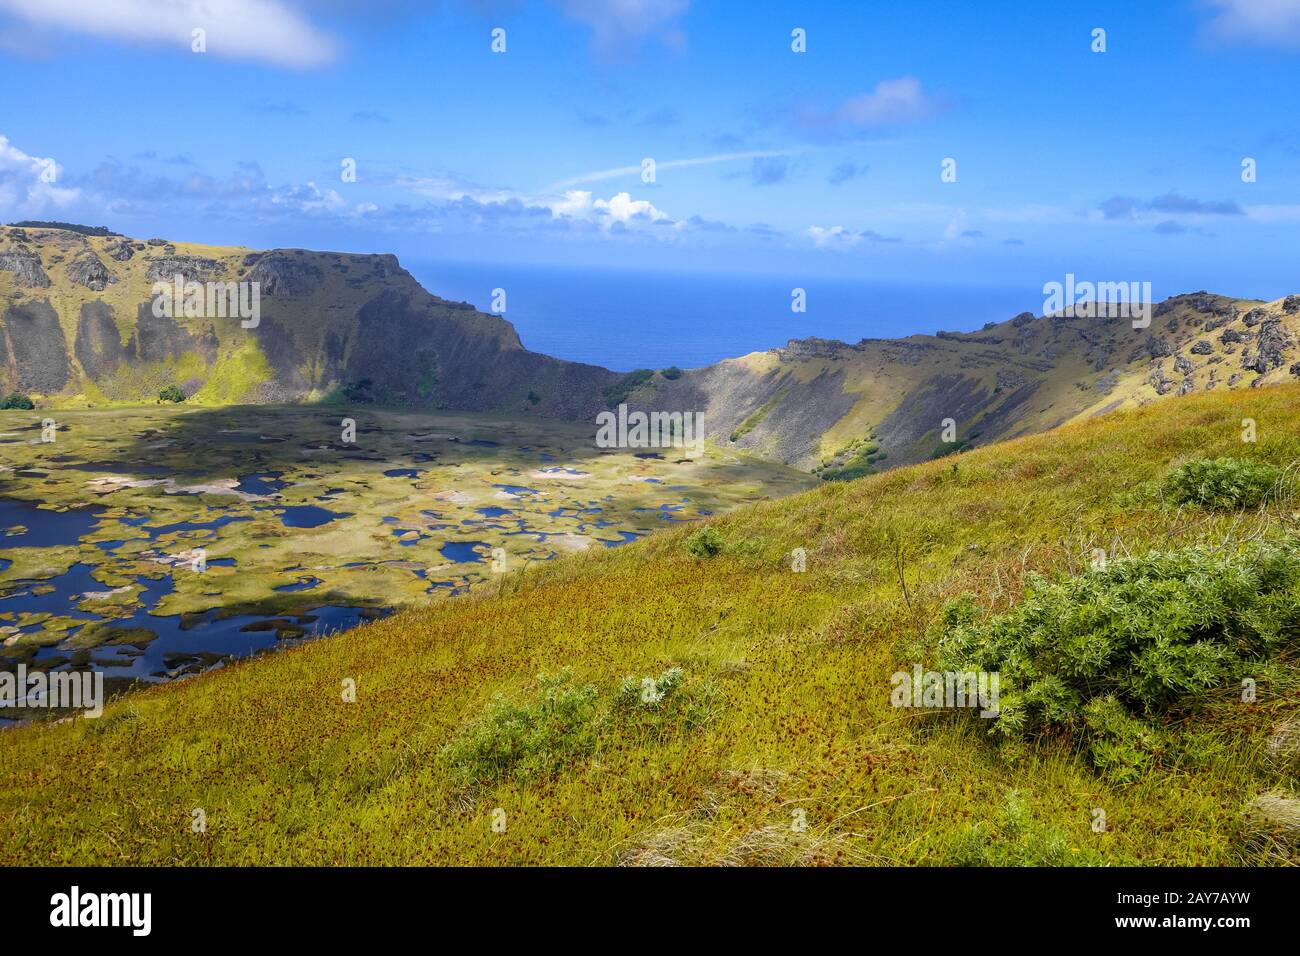 Rano Kau volcano crater in Easter Island Stock Photo